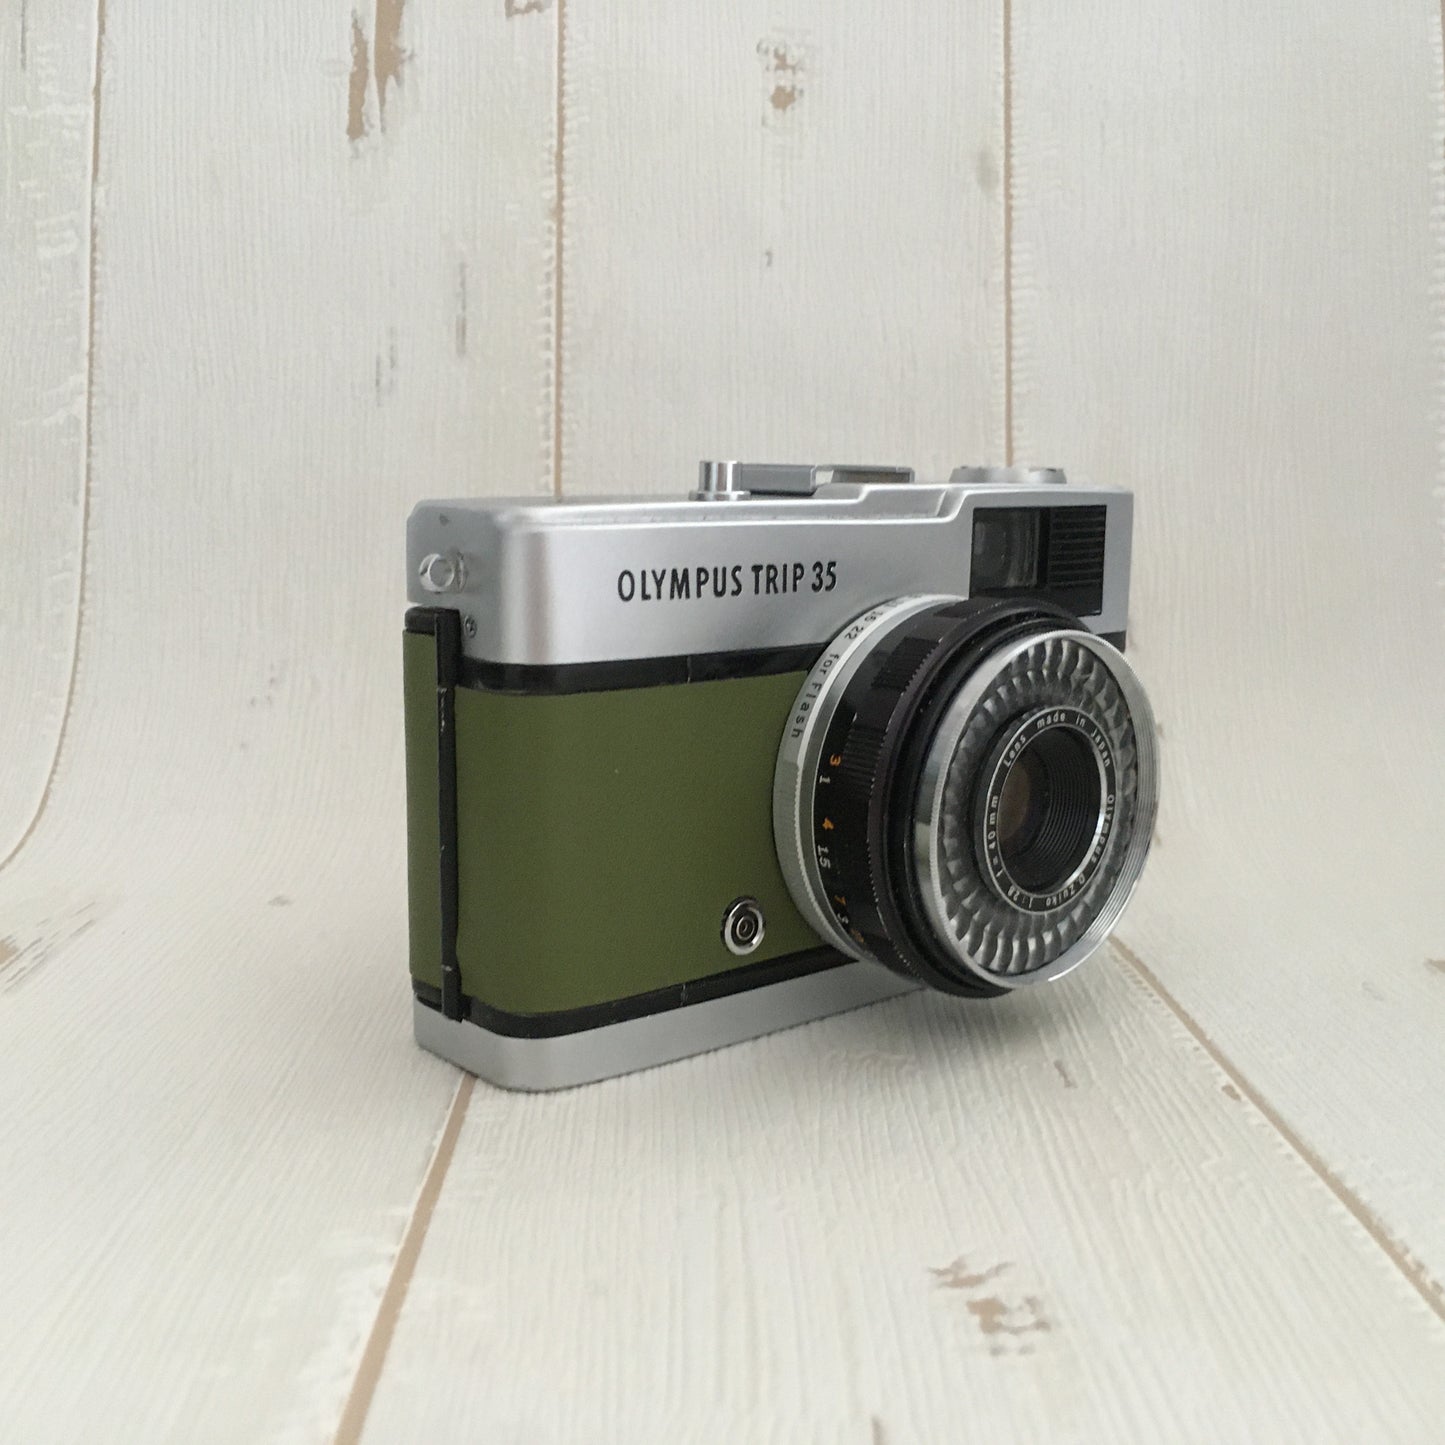 Olympus TRIP35  with green leather